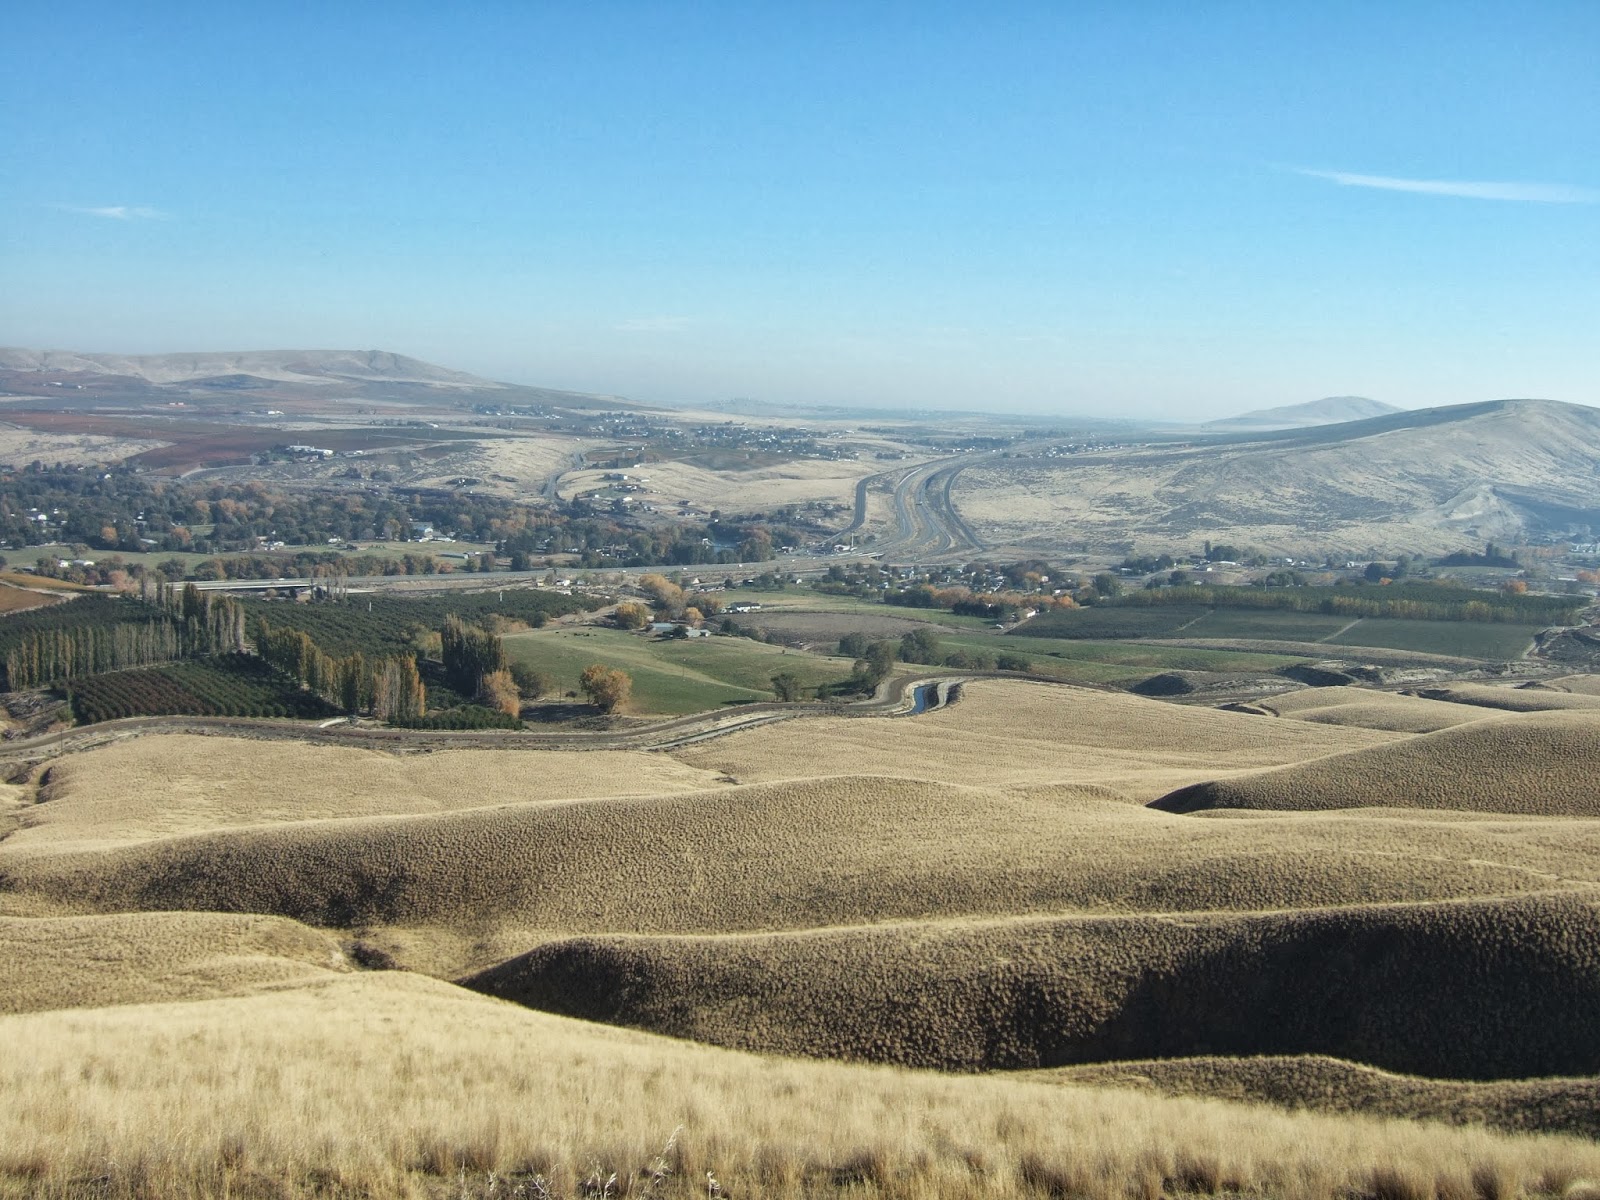 View of the lower Yakima River valley from the Horse Heaven Hills